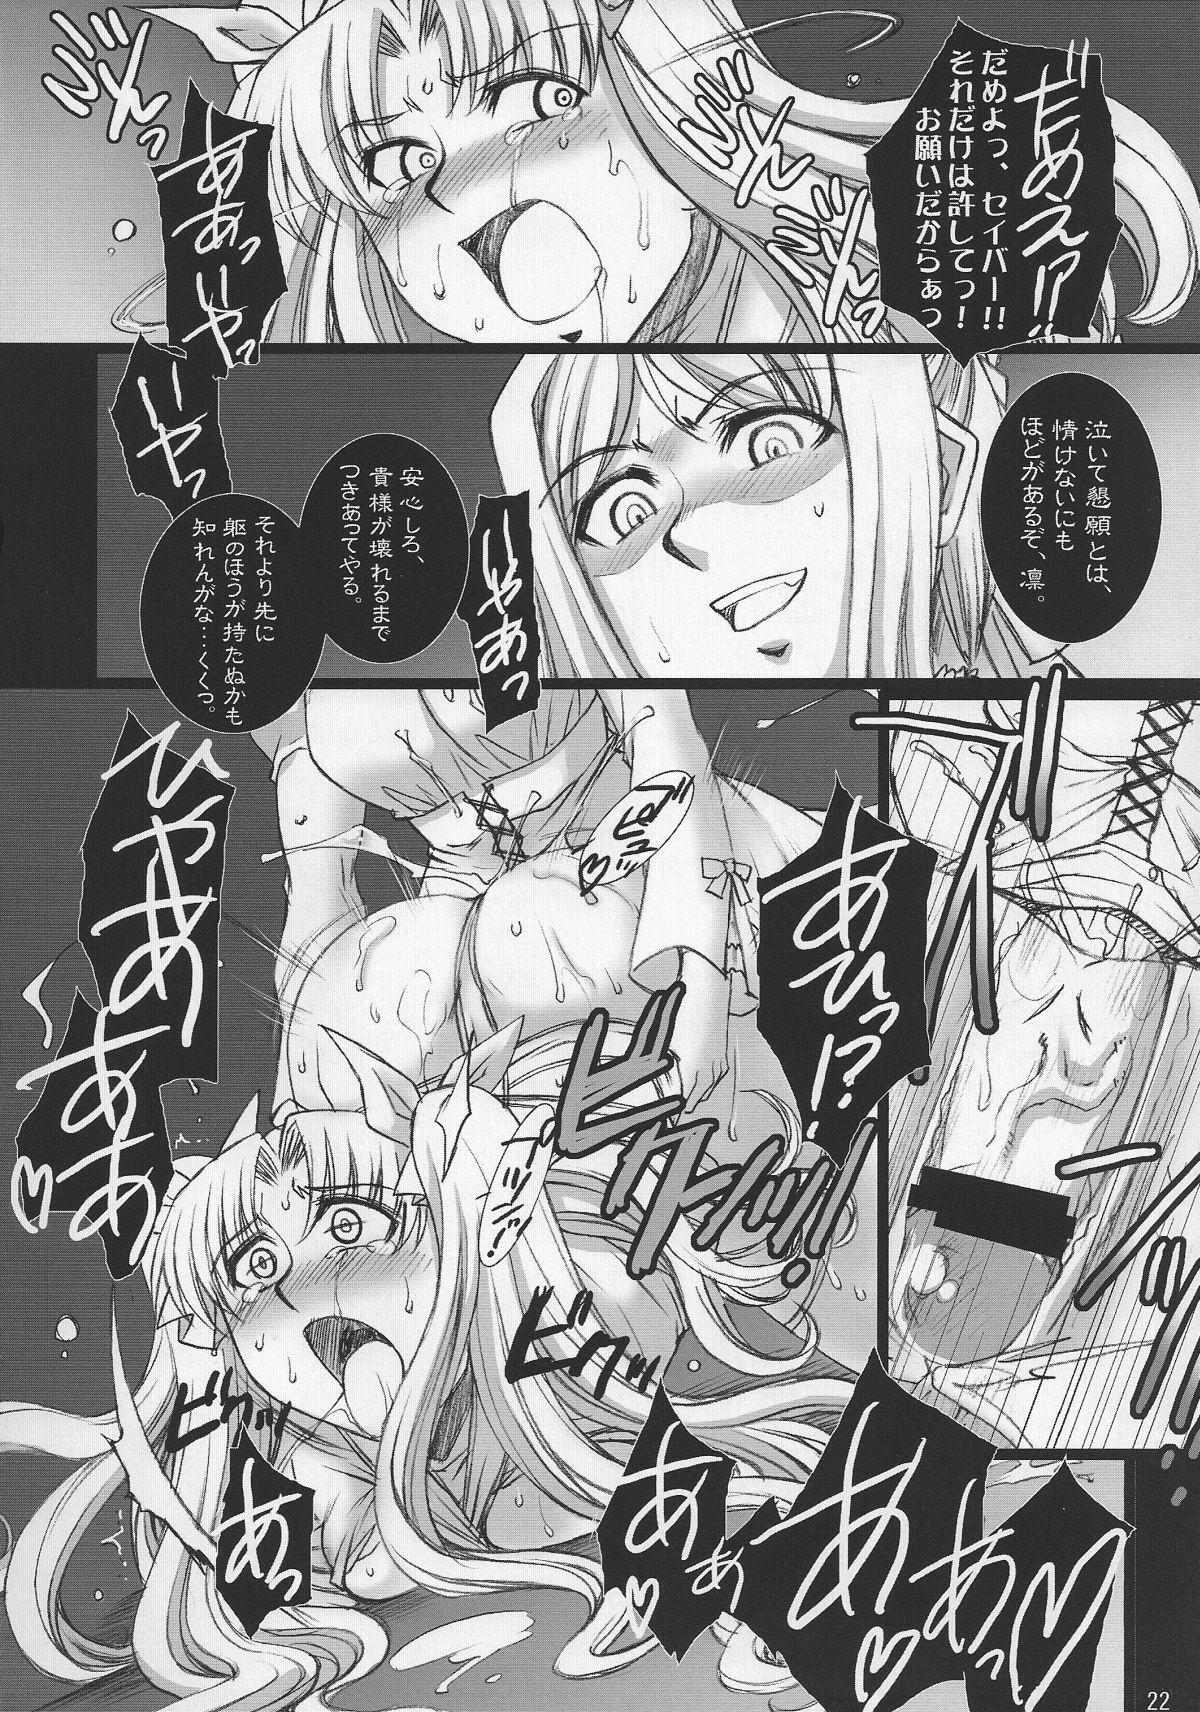 (COMIC1☆2) [H.B (B-RIVER)] Red Degeneration -DAY/3- (Fate/stay night) page 21 full